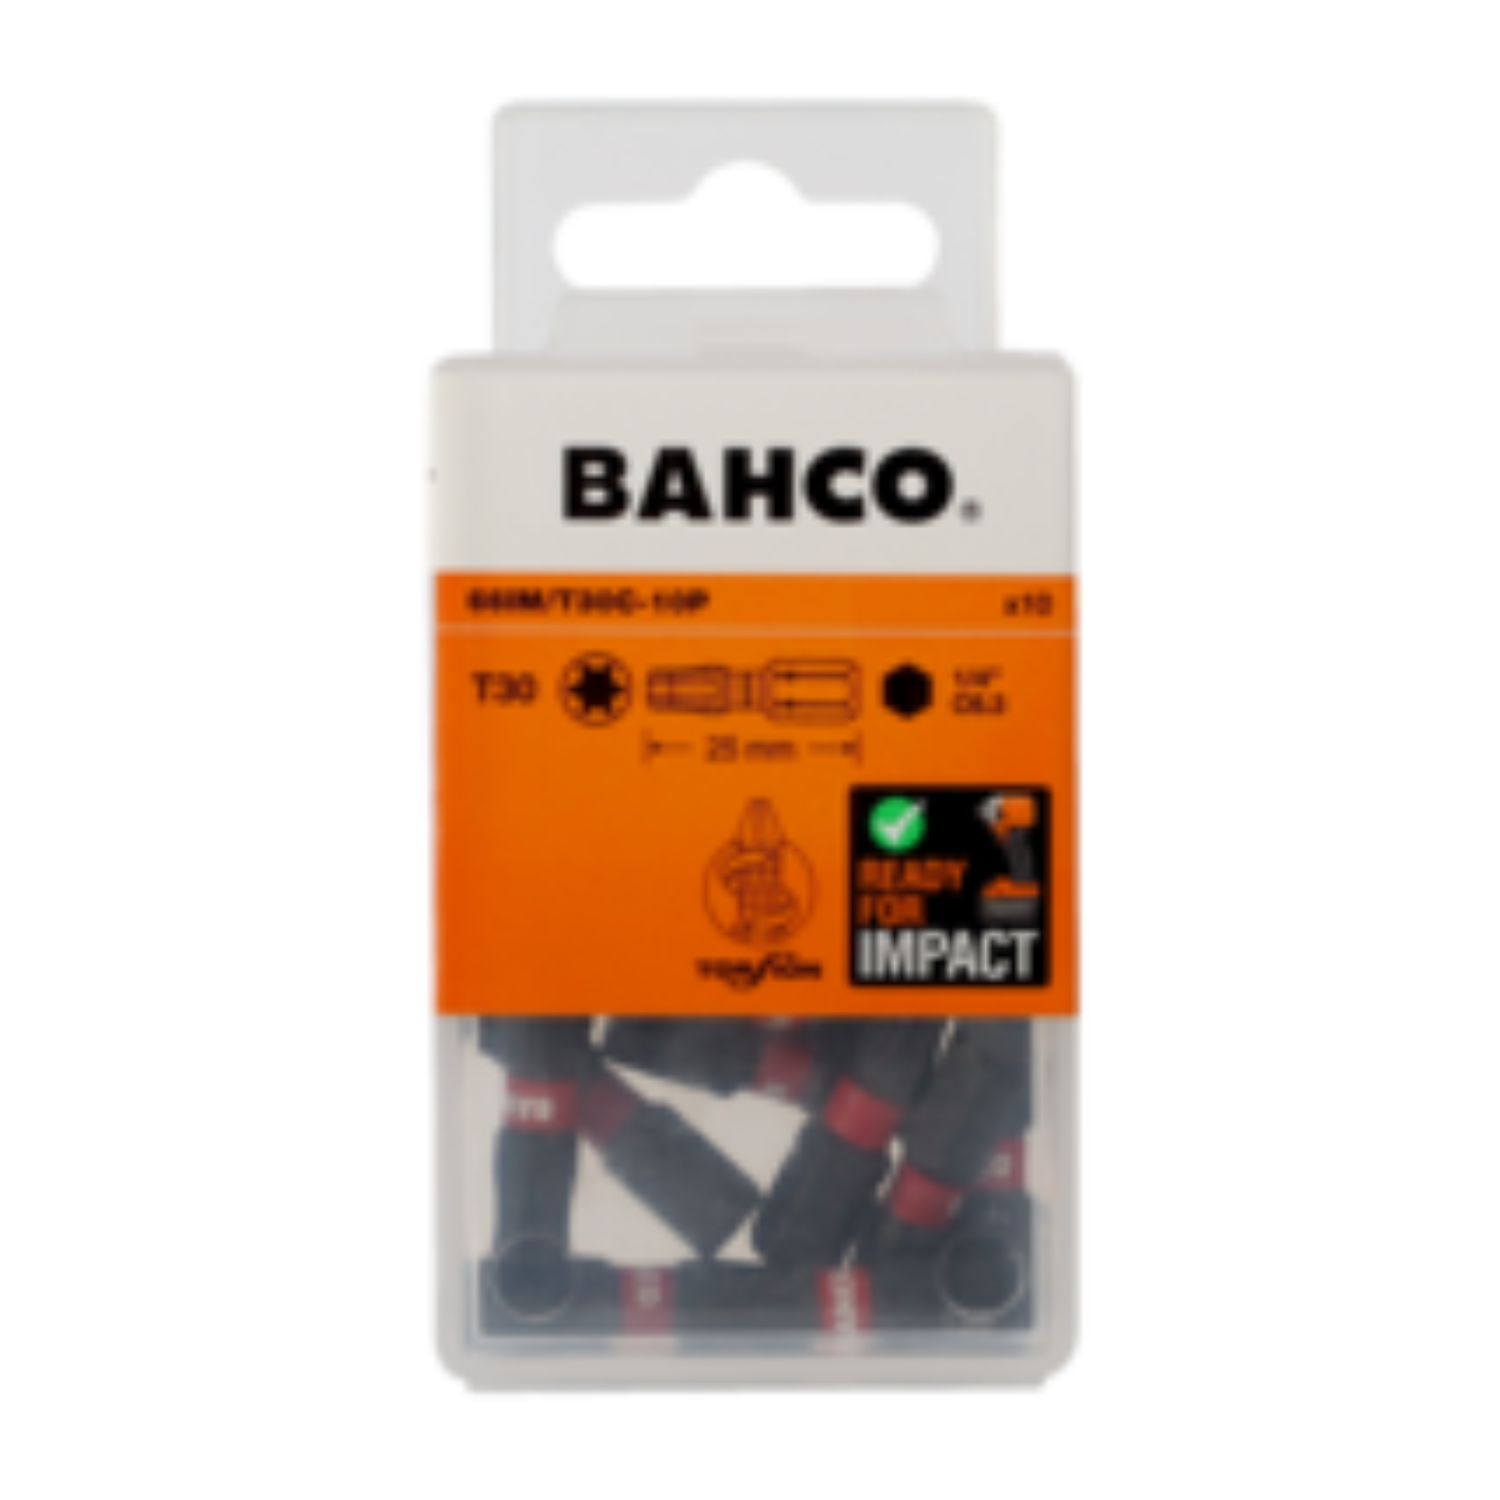 BAHCO 66IM/T 1/4" Heavy-Duty Torsion Screwdriver Bit - Premium Screwdriver Bit from BAHCO - Shop now at Yew Aik.